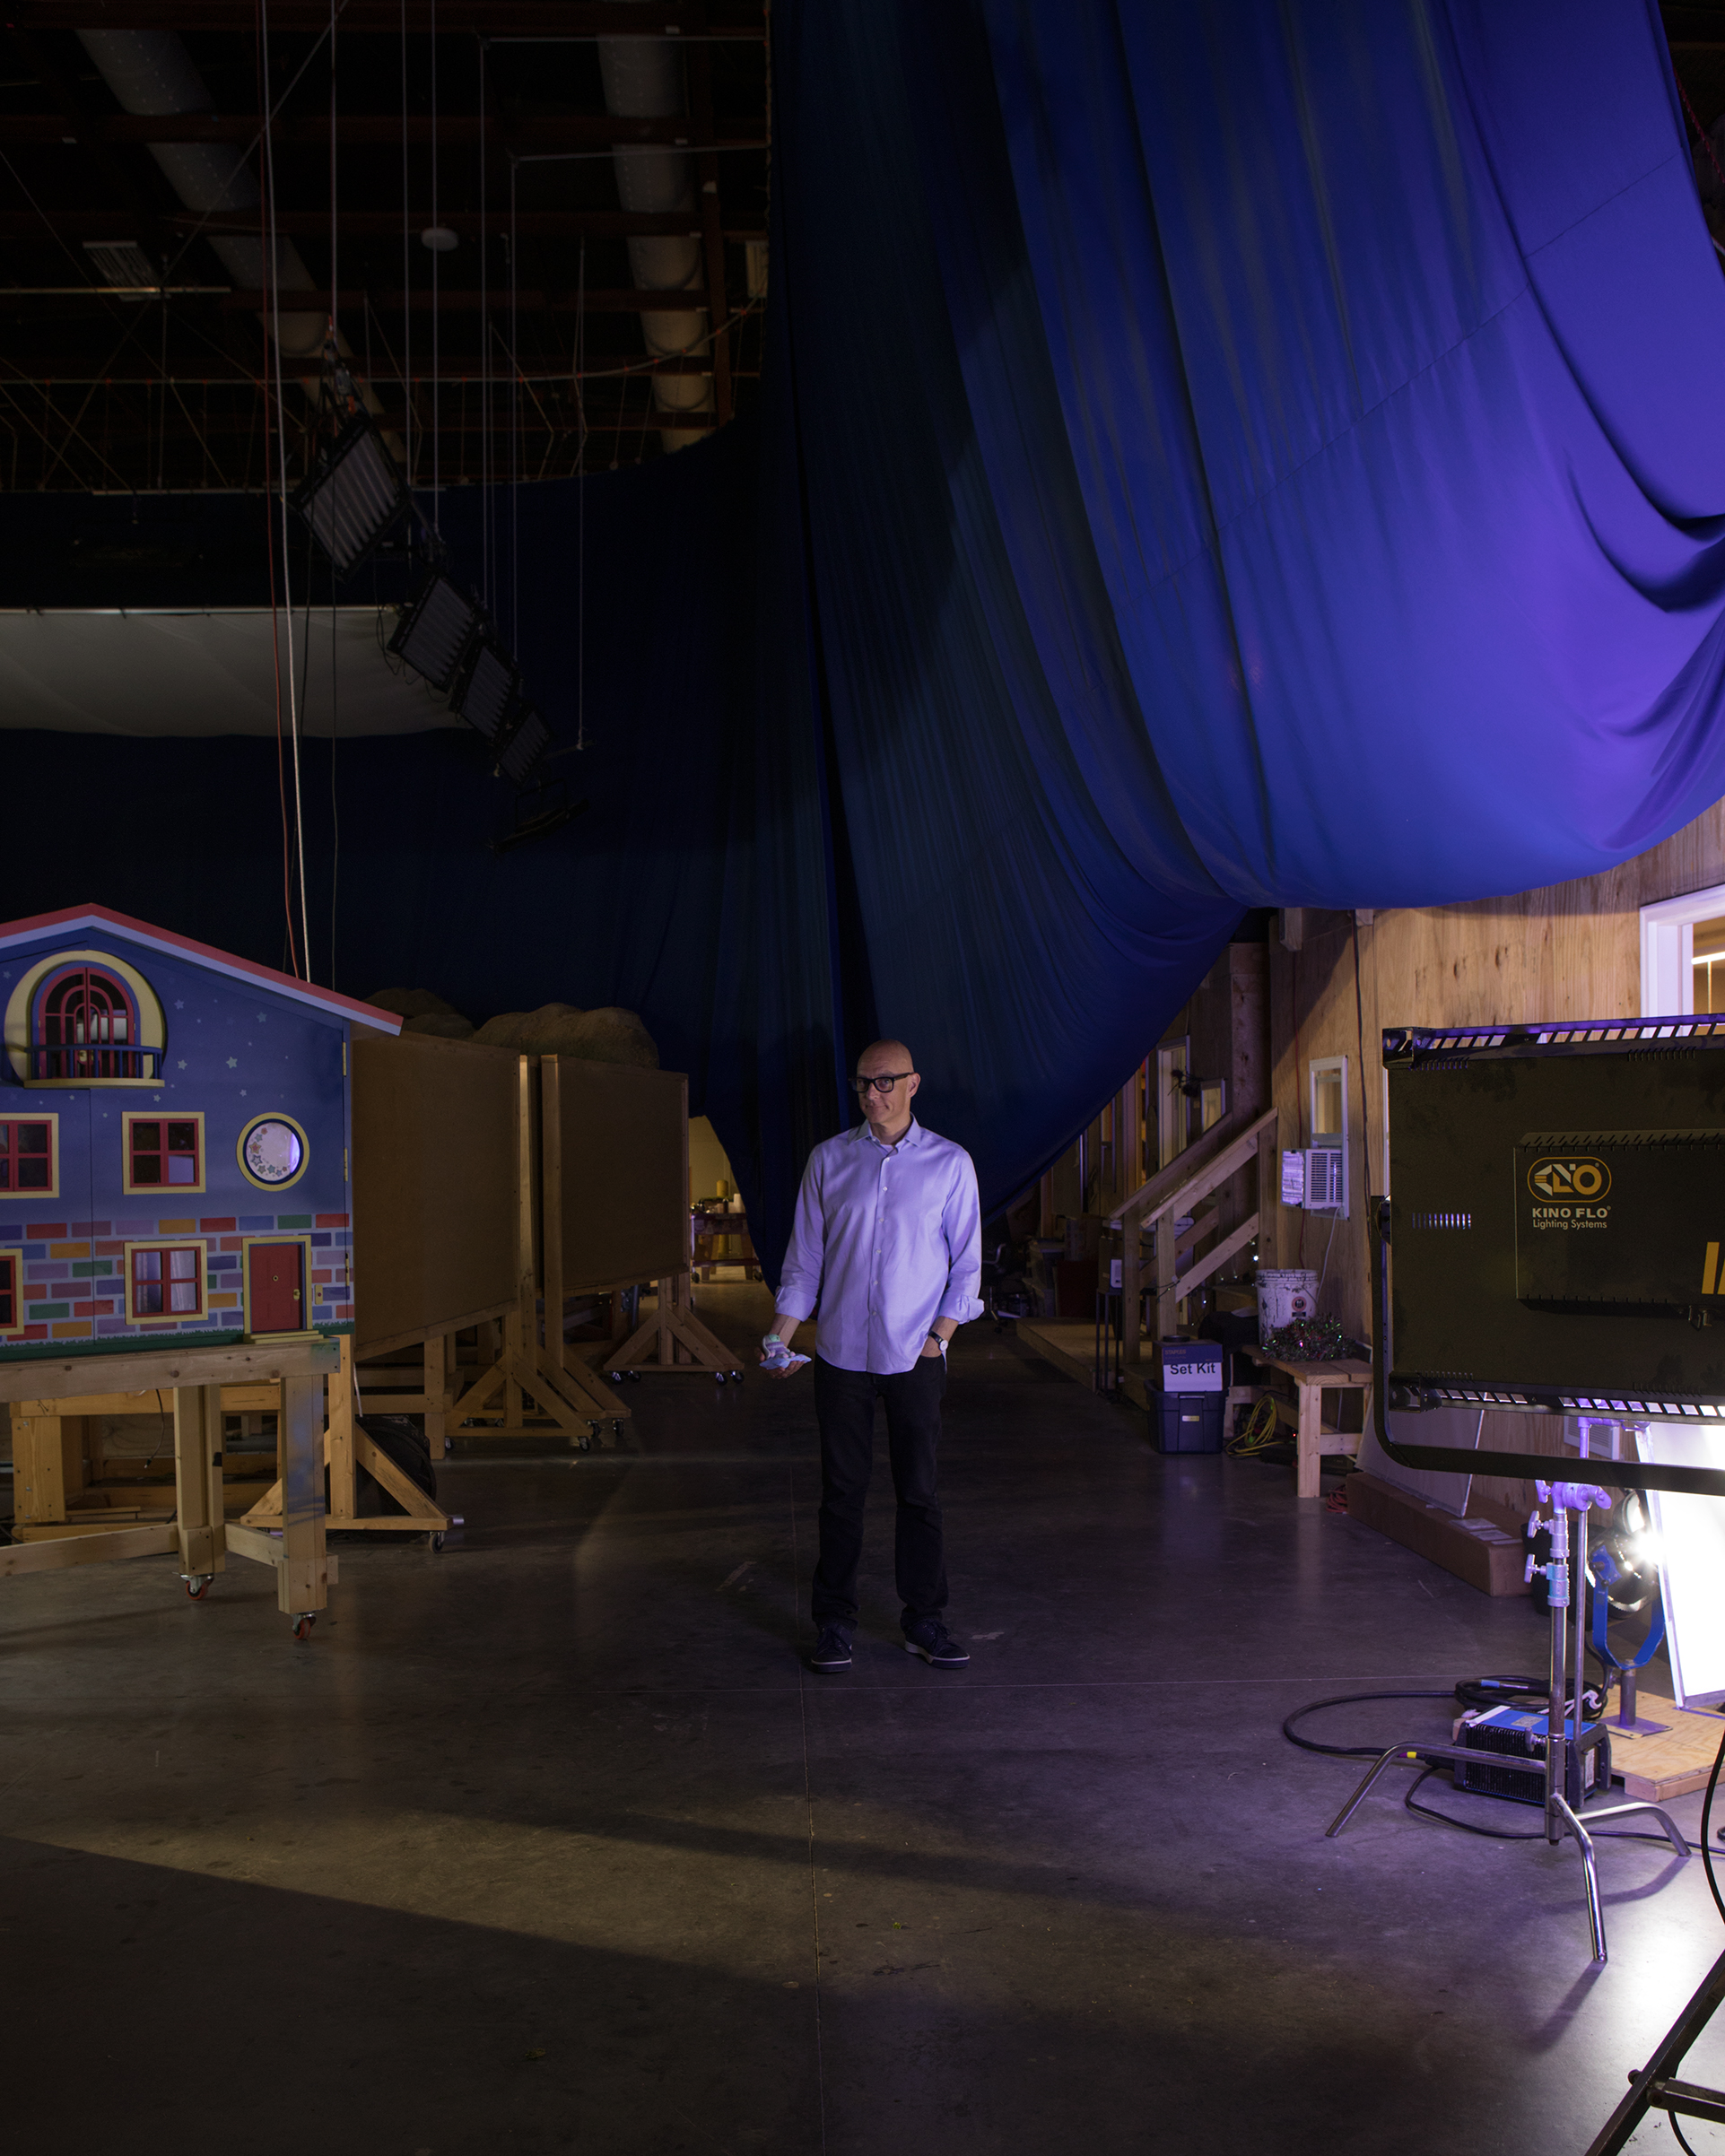 Teletubbies co-creator Andrew Davenport behind the scenes on his new project ‘Moon and Me’, which will premiere later this year. Photographed on location at Pinewood Atlanta Studios. (RaMell Ross for TIME)